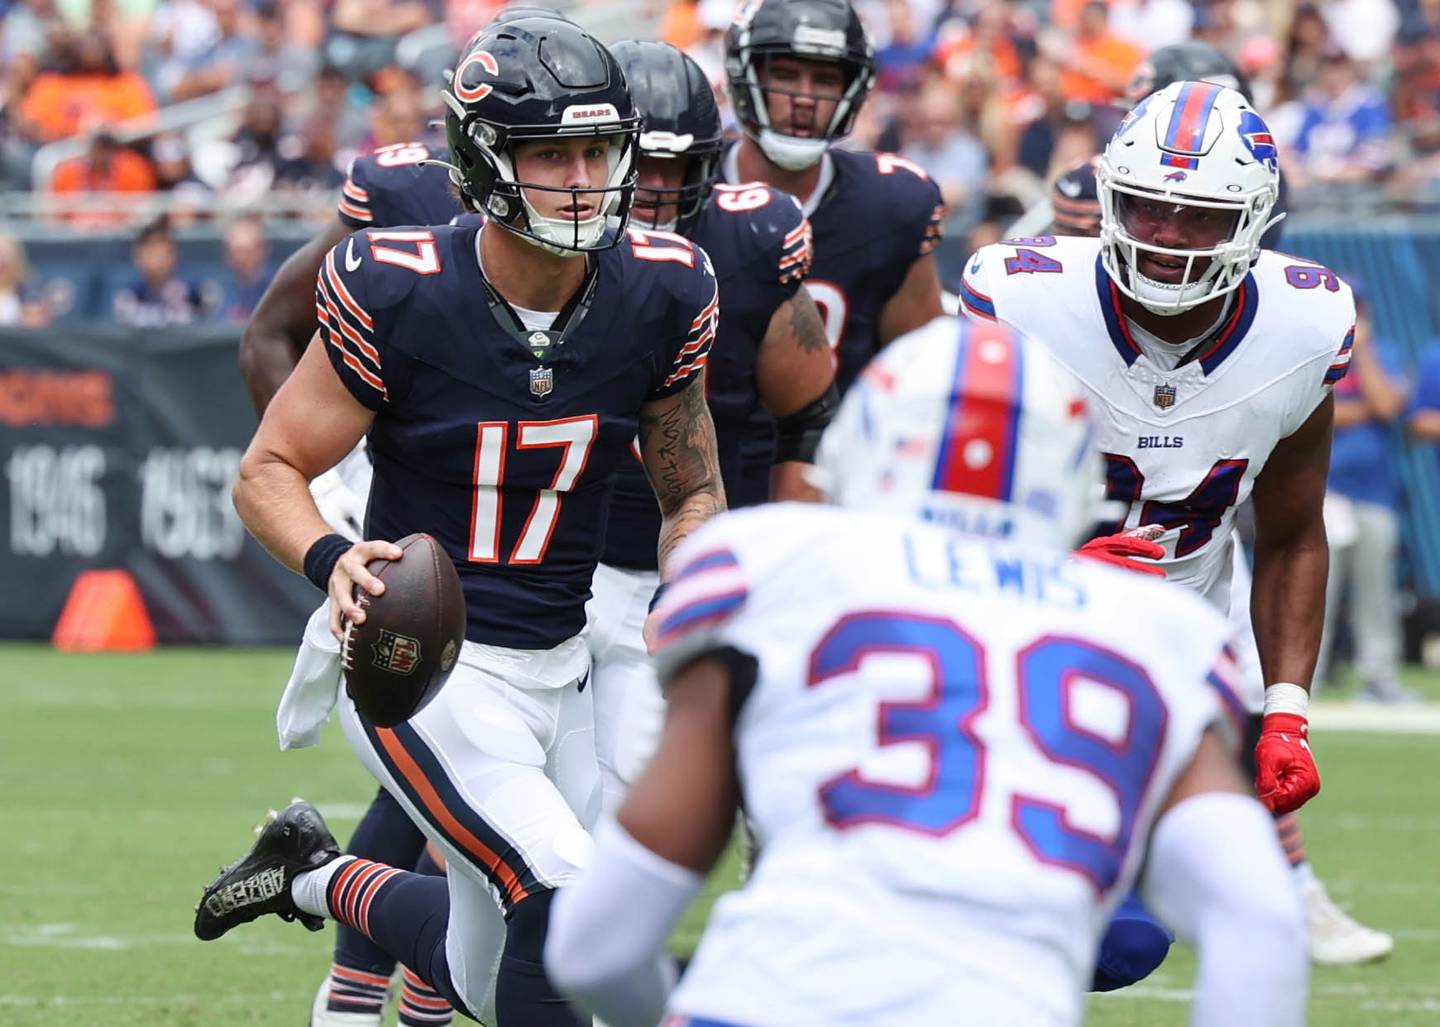 Chicago Bears quarterback Tyson Bagent scrambles through the Buffalo Bills pass rush for a good gain during their preseason game Saturday, Aug. 26, 2023, at Soldier Field in Chicago.